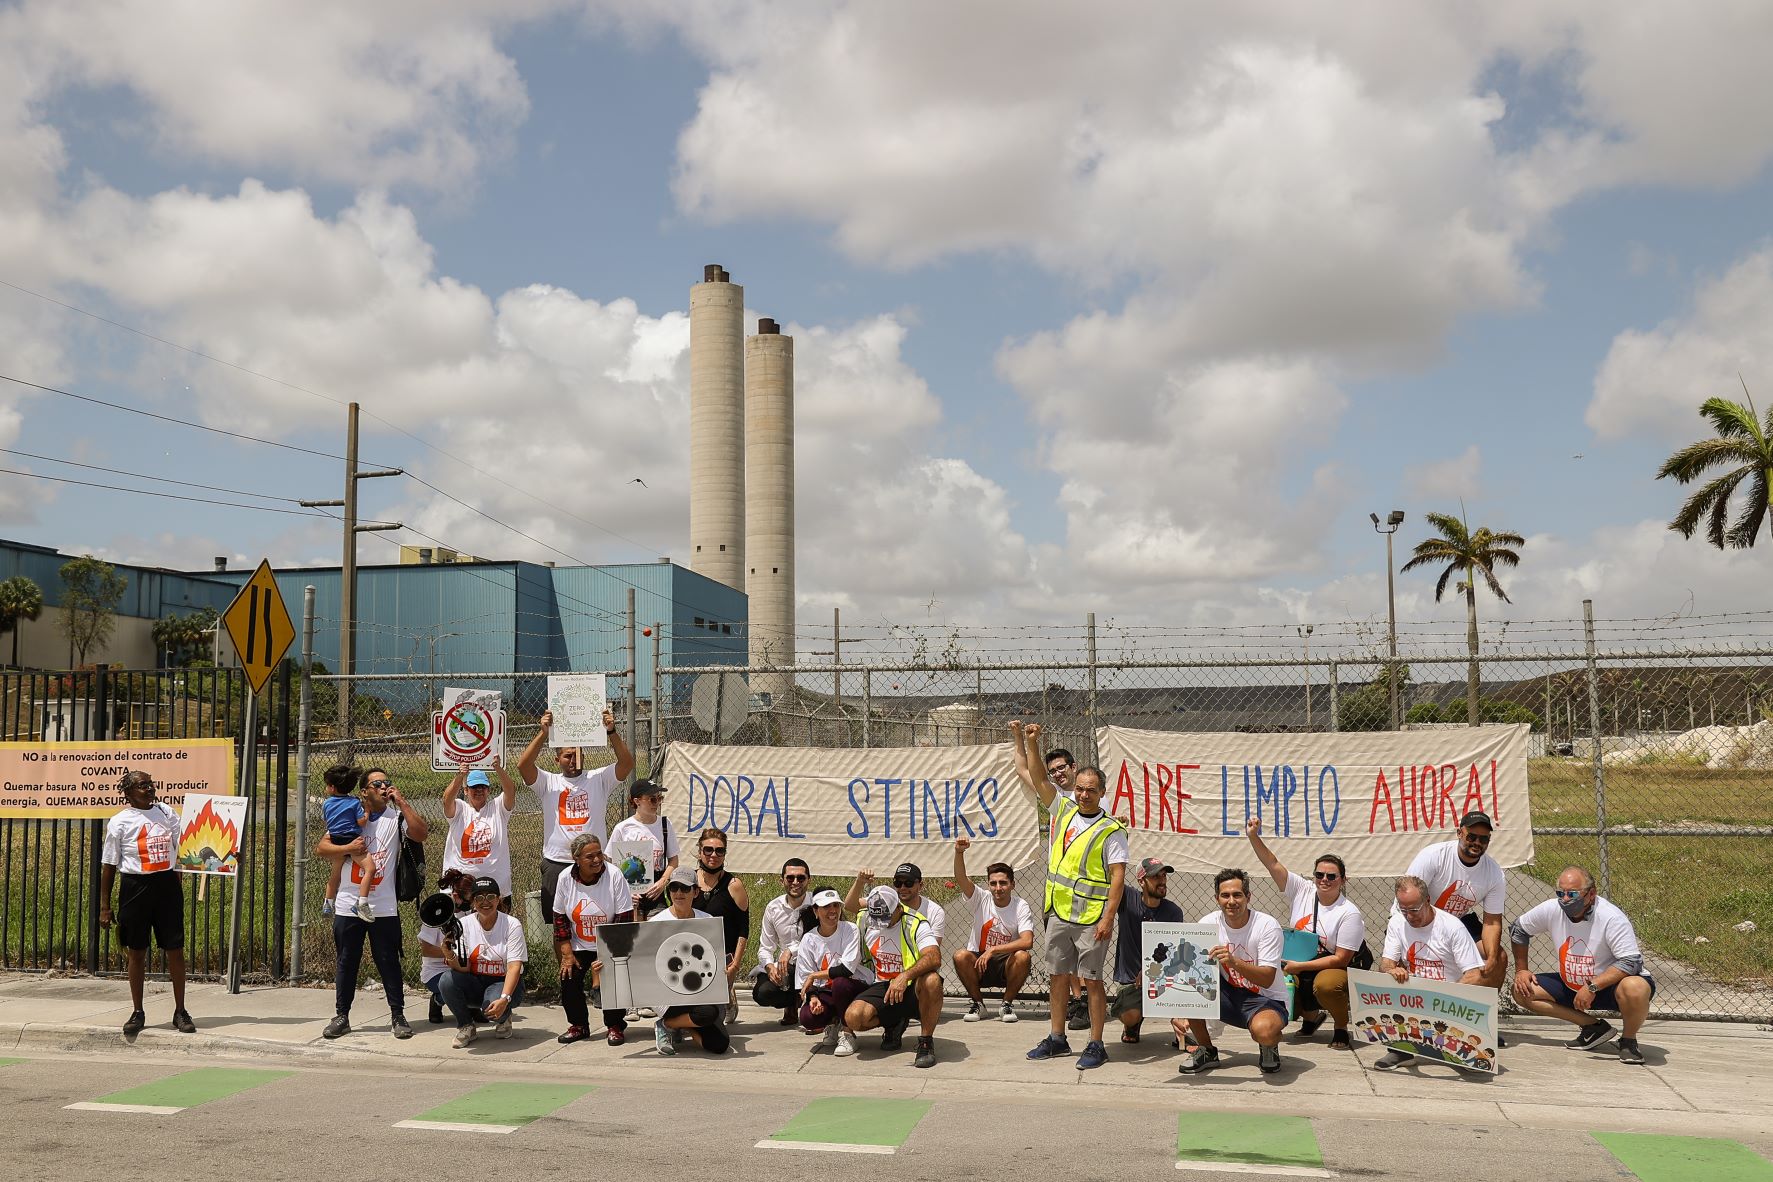 In front of smokestacks, banners reading "Aire Limpio Ahora!" and "Doral Stinks!", along with a crowd of activists